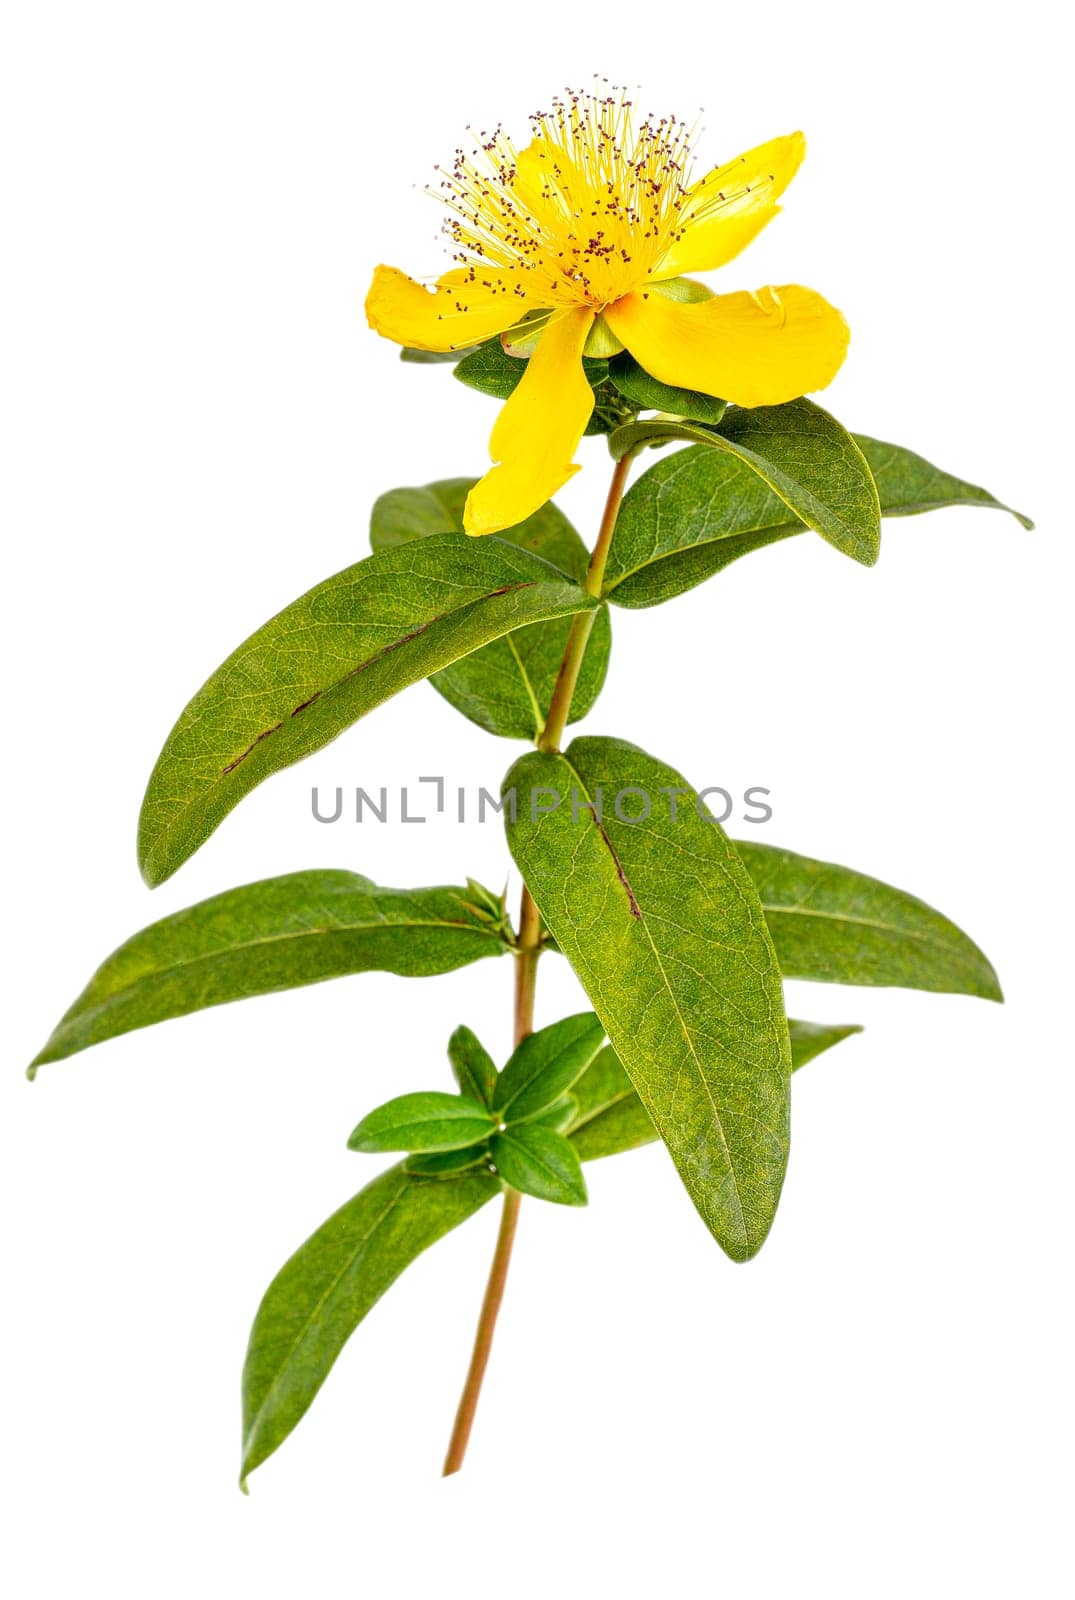 Perforate St John's-Wort Flowers Isolated on White Background.